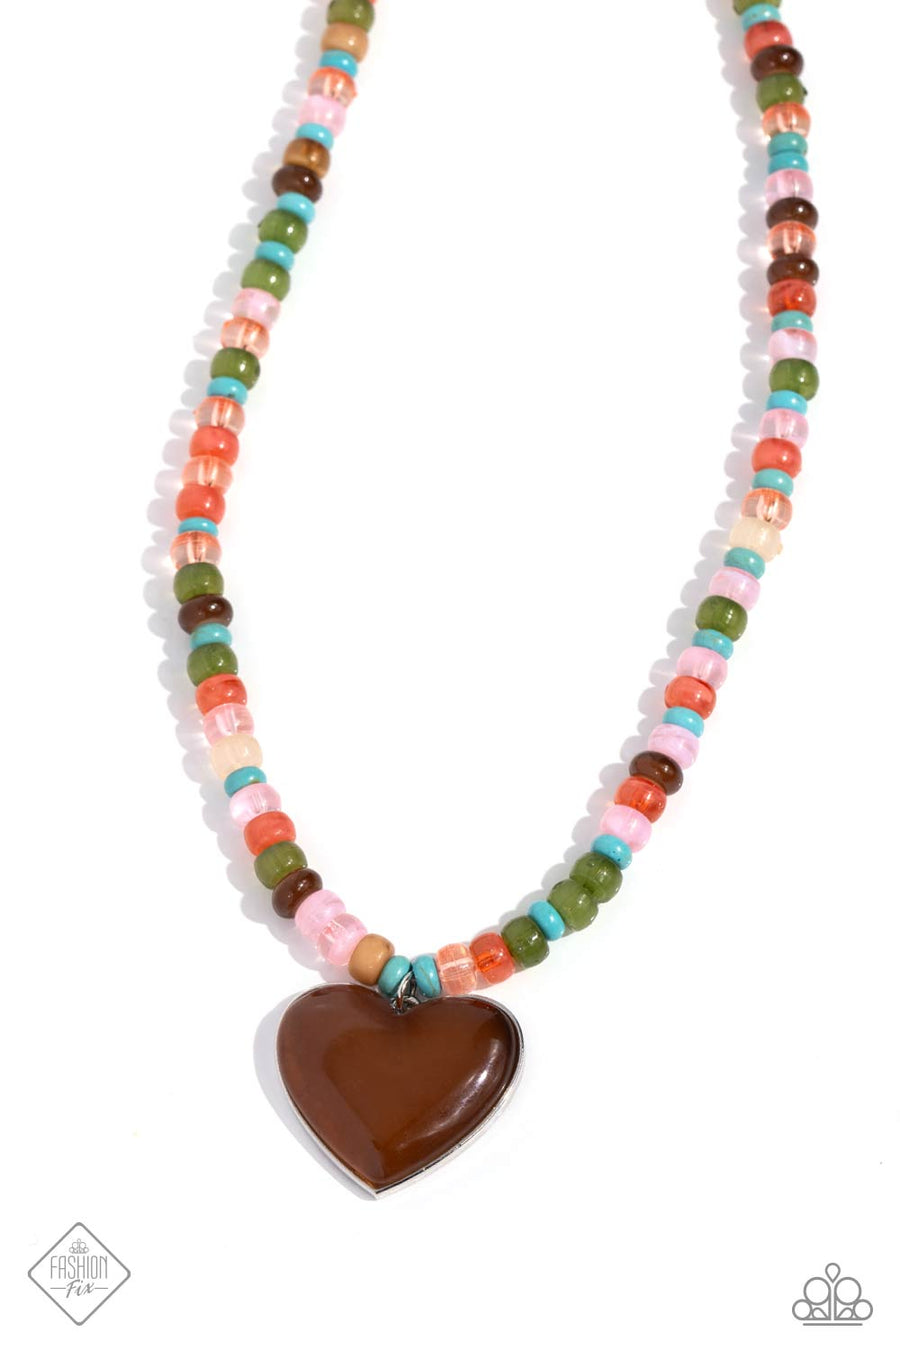 Desertscape Delight - Brown Necklace - Paparazzi Accessories - Stretched across an invisible wire, multicolored beads, featuring various opacities and sheens, coalesce around the collar. An oversized brown cat's eye stone in a silver heart frame swings from the bottom of the multicolored display, creating an earthily endearing pendant.